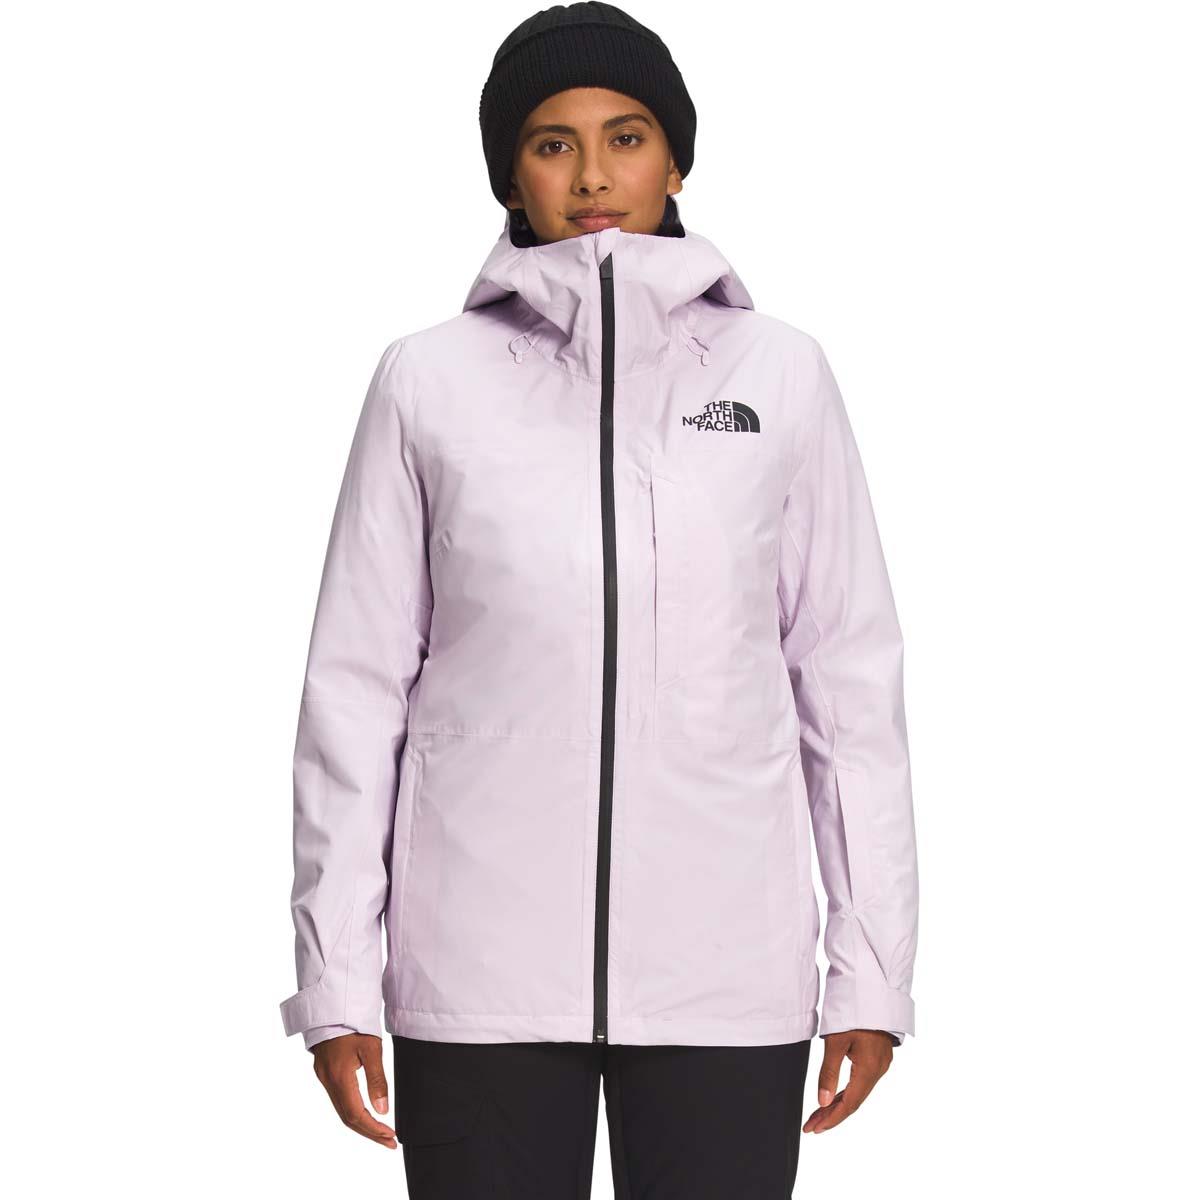 homoseksueel eigenaar filosoof Women The North Face ThermoBall ECO Snow Triclimate Jacket - NF0A4R18 |  Buckmans.com